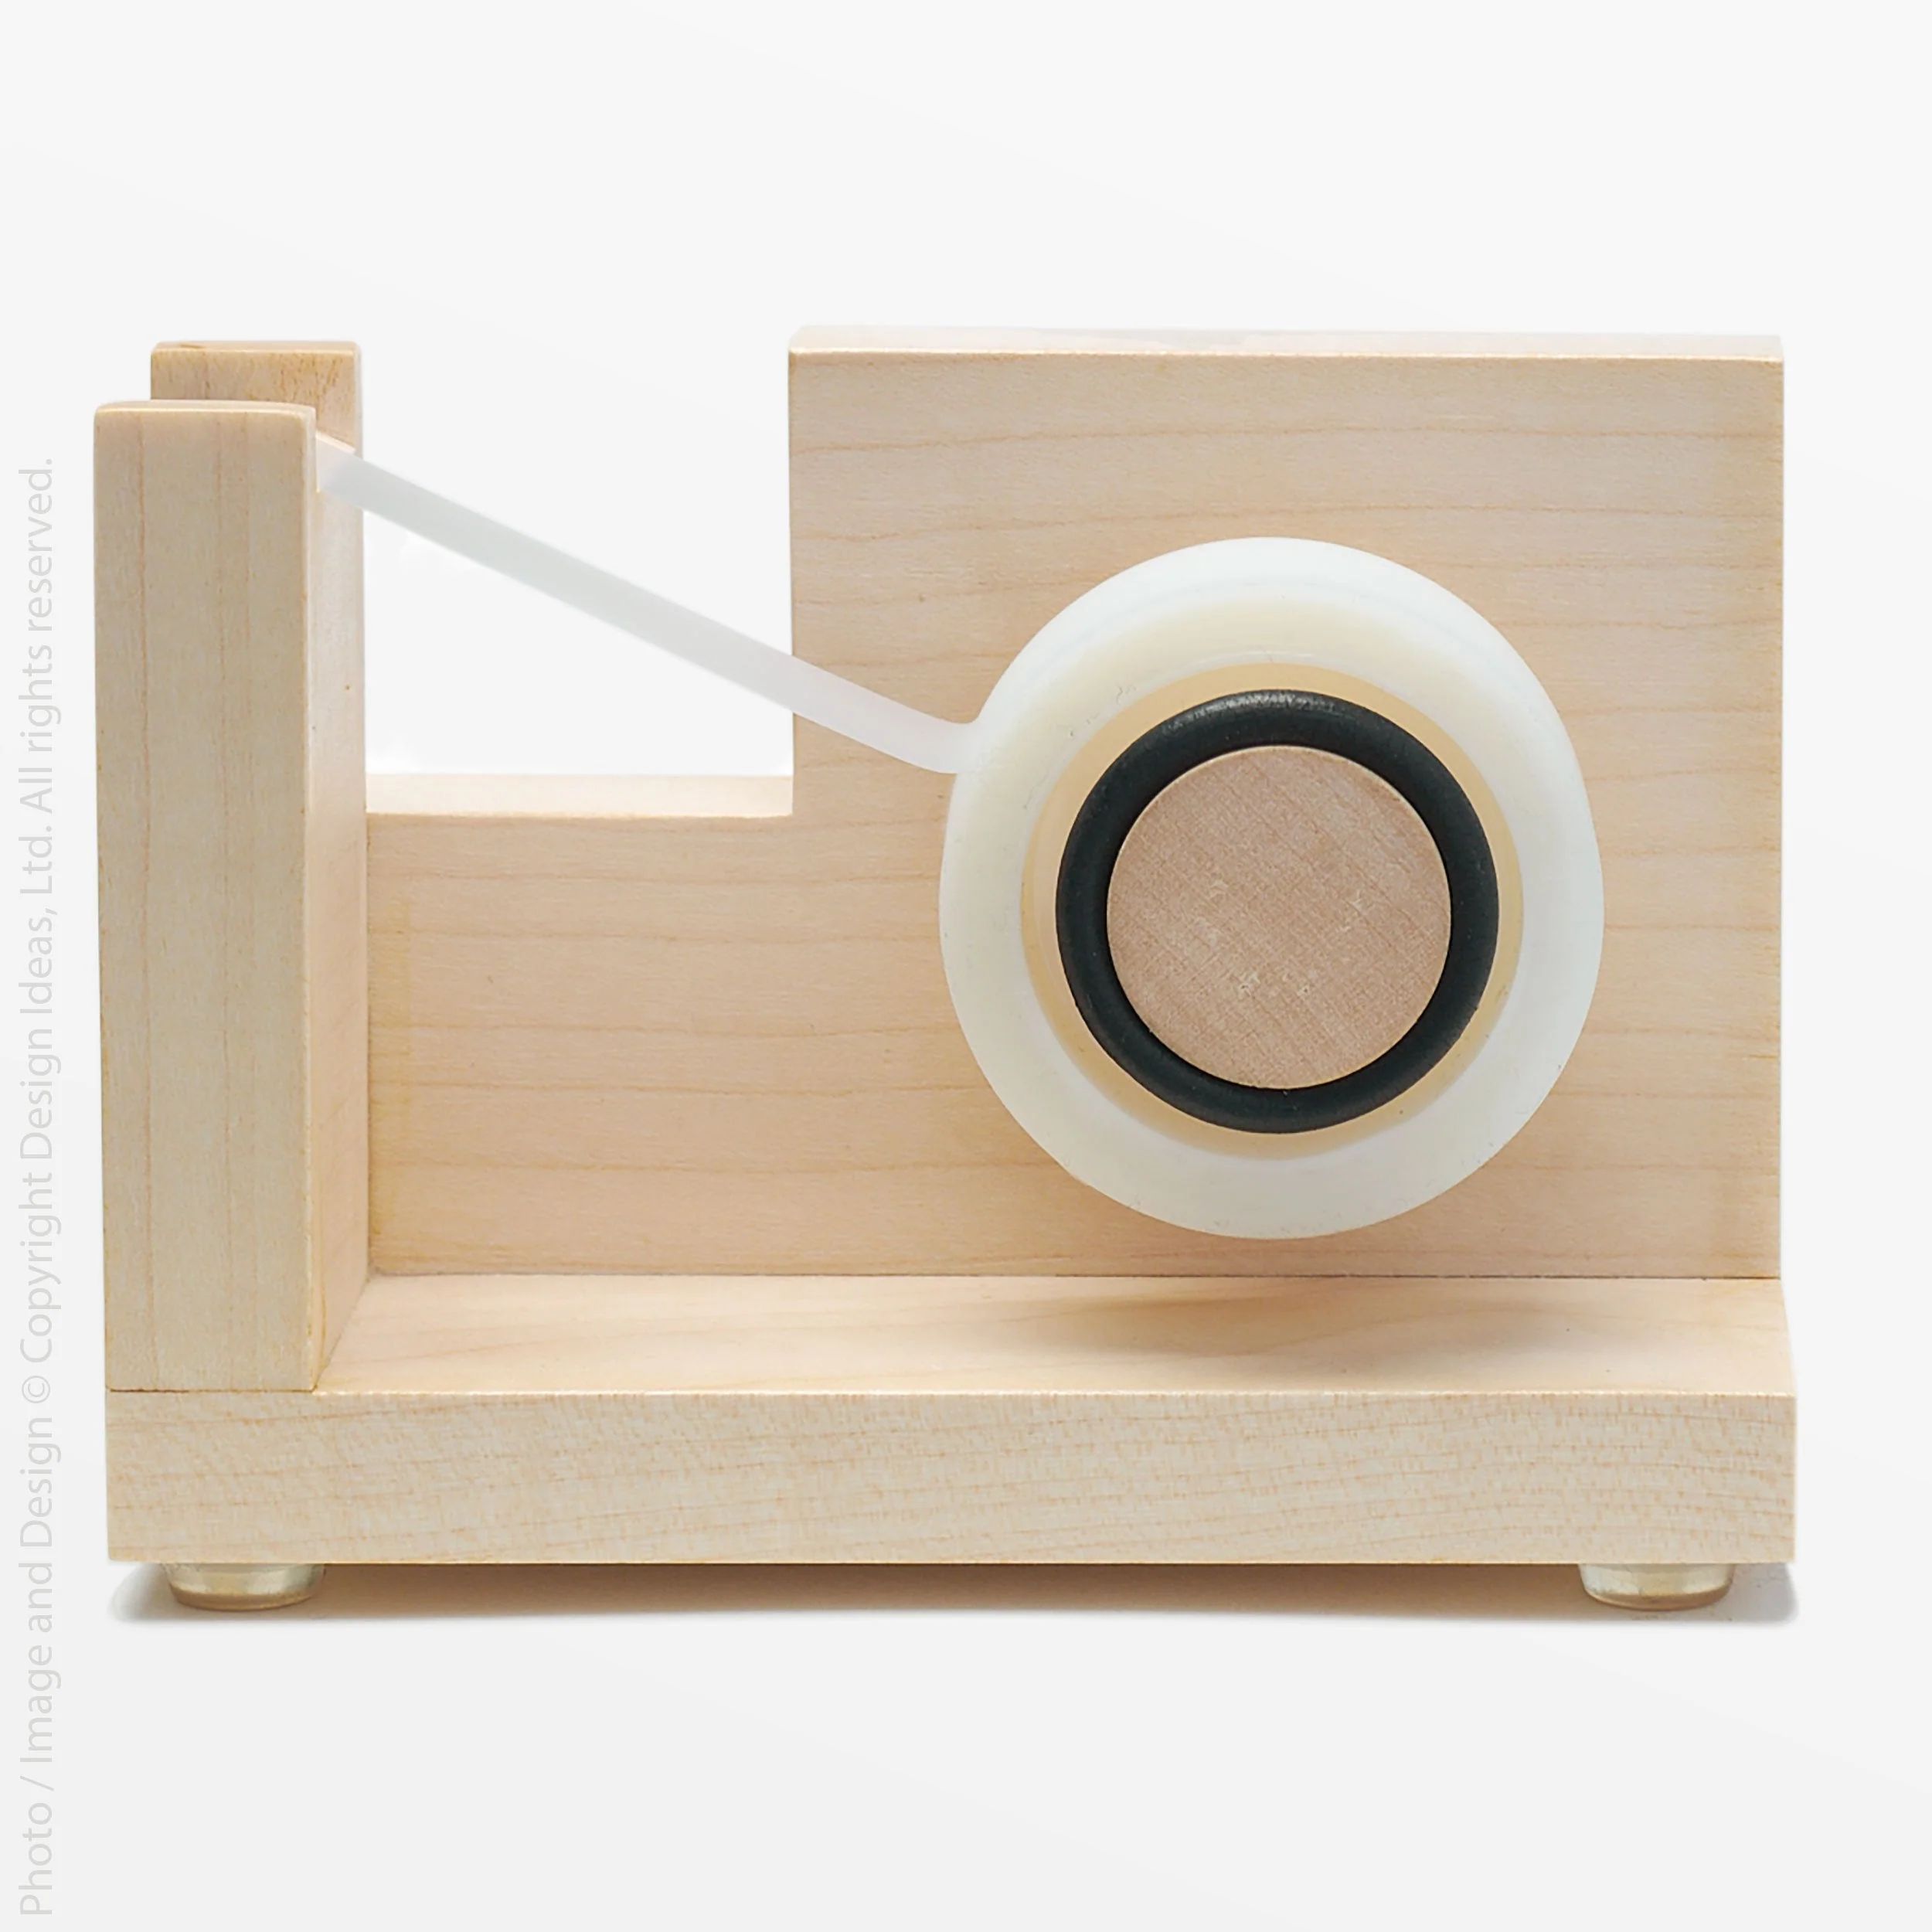 Upland™ Sycamore Tape Dispenser | Texxture Home